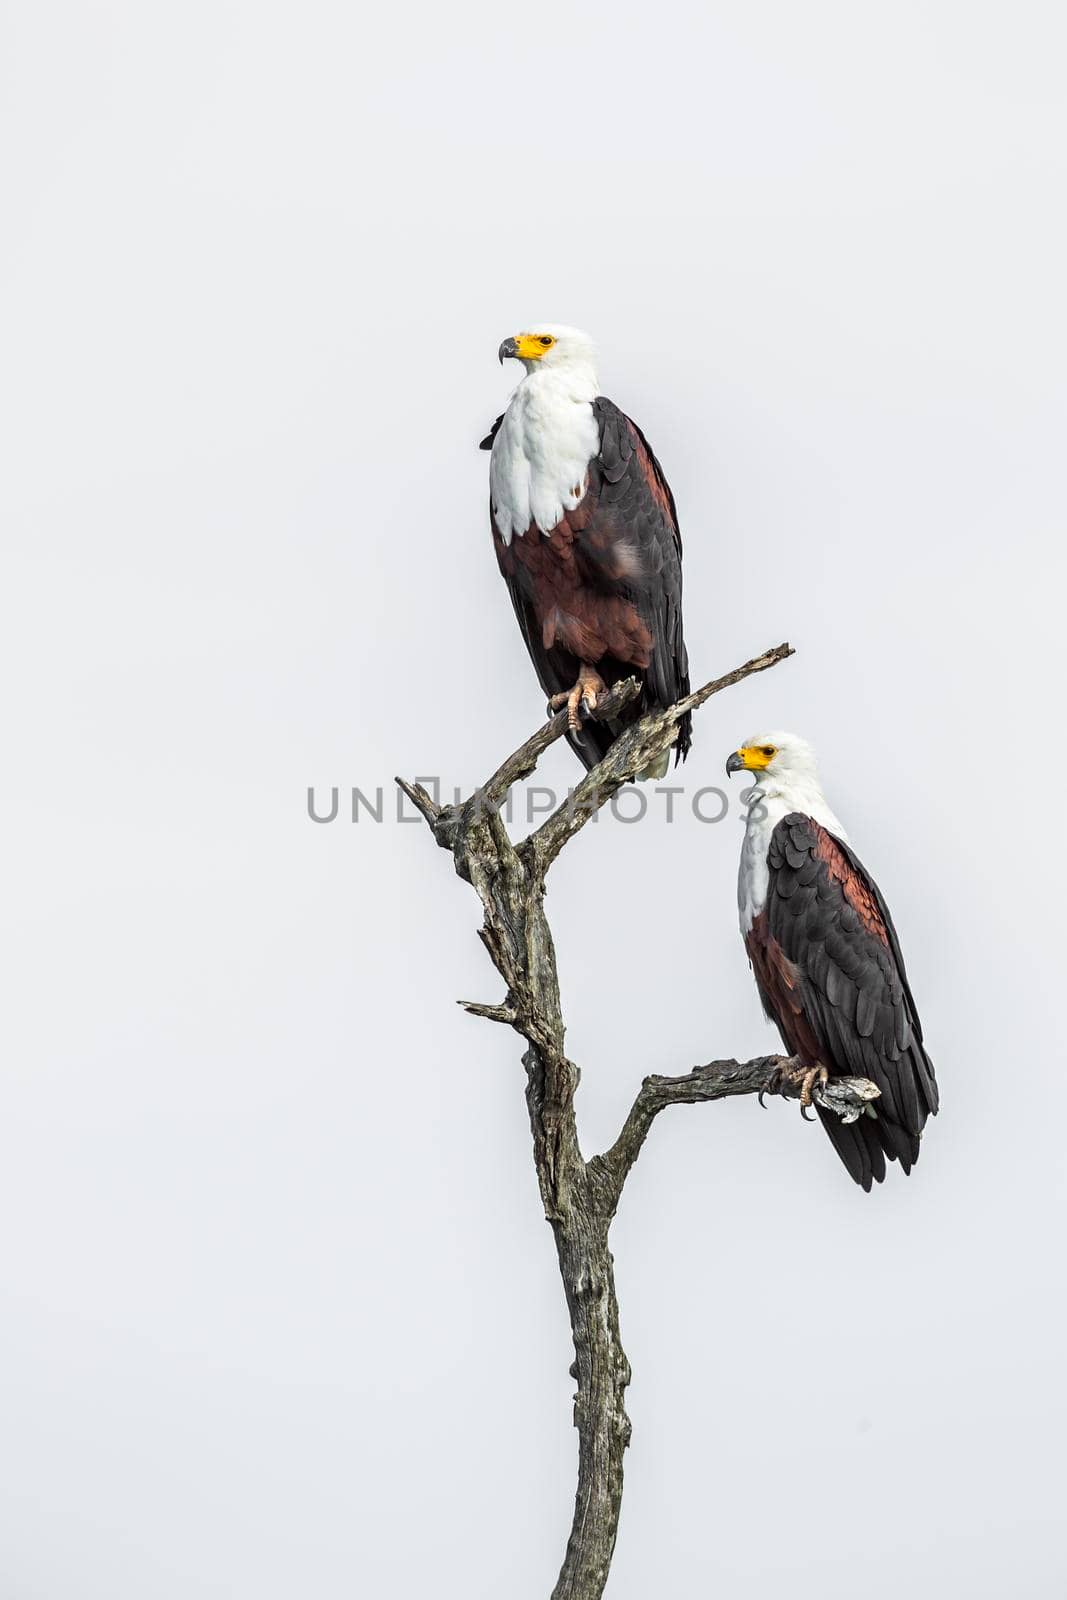 African fish eagle couple isolated in white background in Kruger National park, South Africa ; Specie Haliaeetus vocifer family of Accipitridae